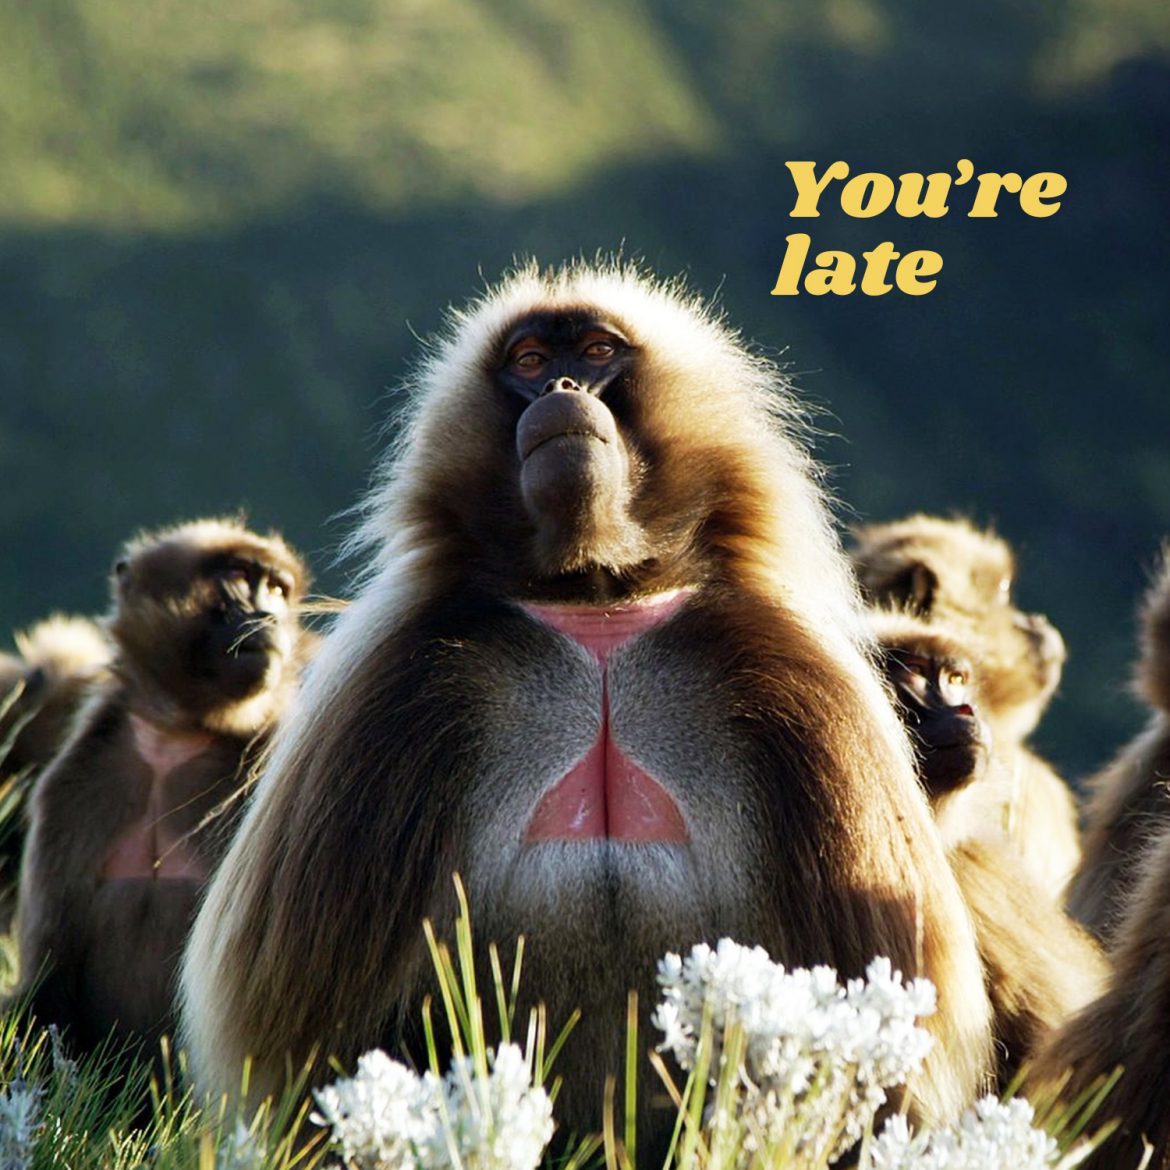 You’re late